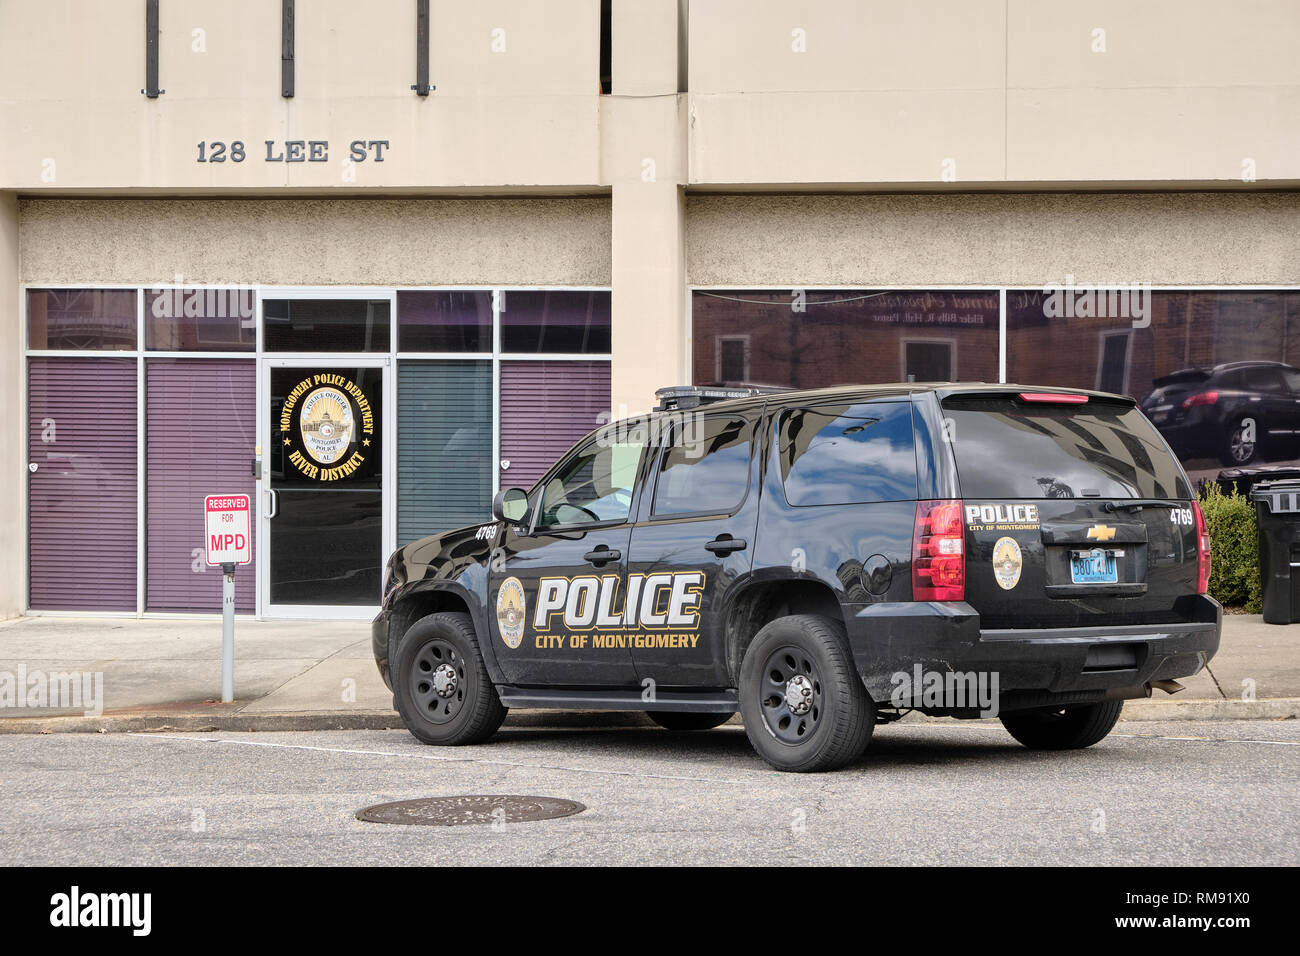 Black police or law enforcement SUV vehicle parked in front of a district or precinct headquarters building in Montgomery Alabama, USA. Stock Photo